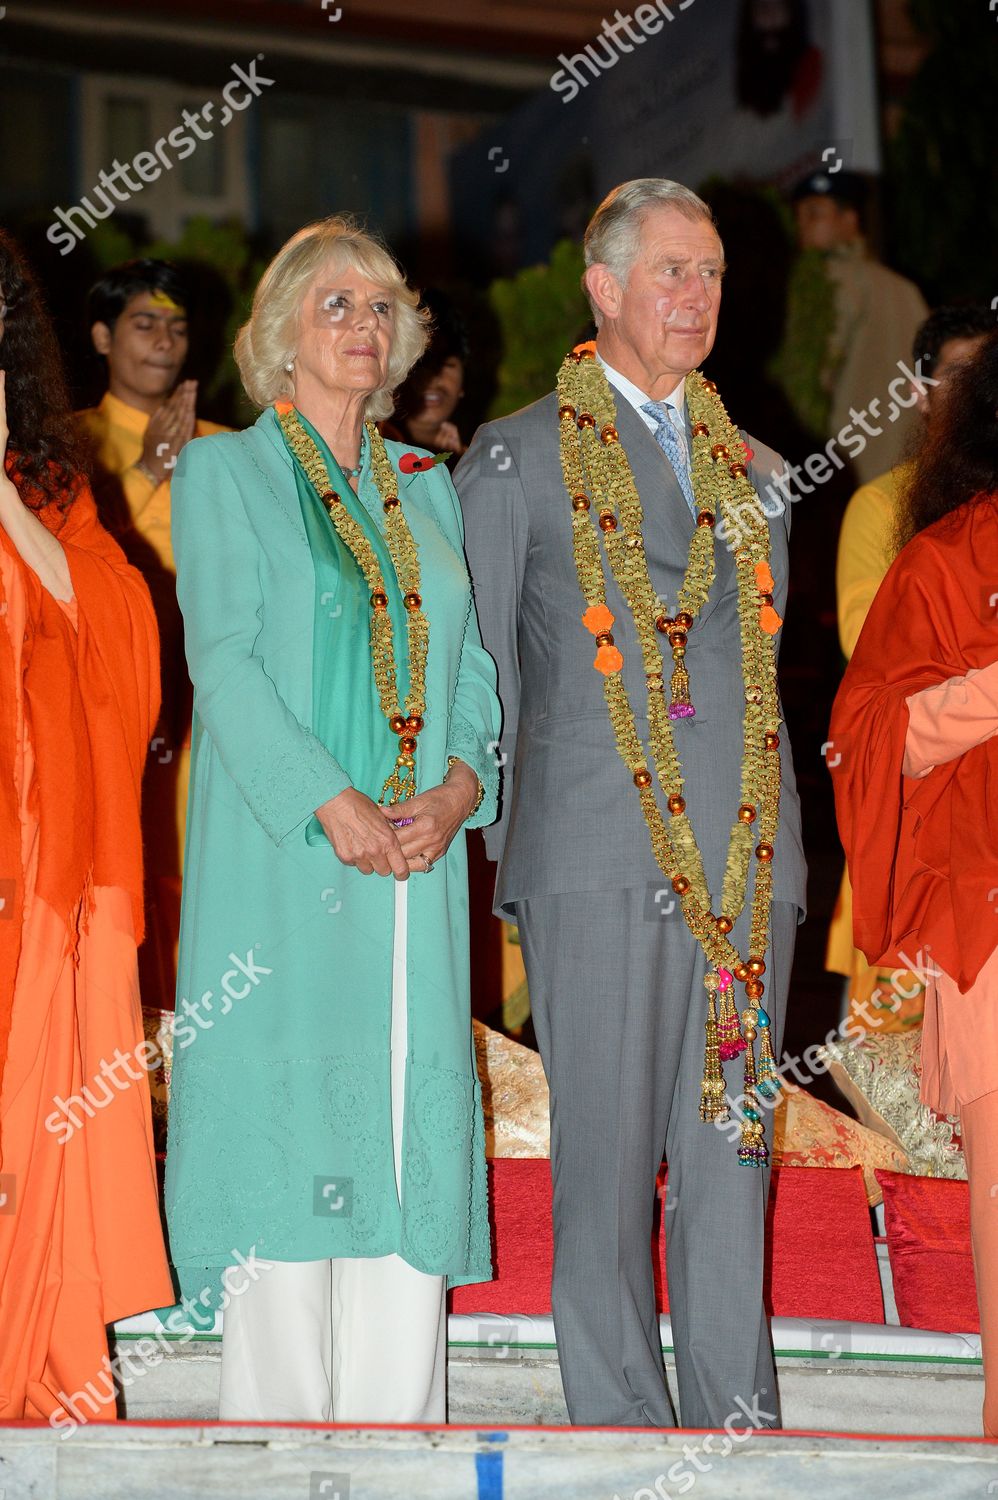 prince-charles-and-camilla-duchess-of-cornwall-attend-a-sunset-aarti-ceremony-rishikesh-india-shutterstock-editorial-3329314f.jpg